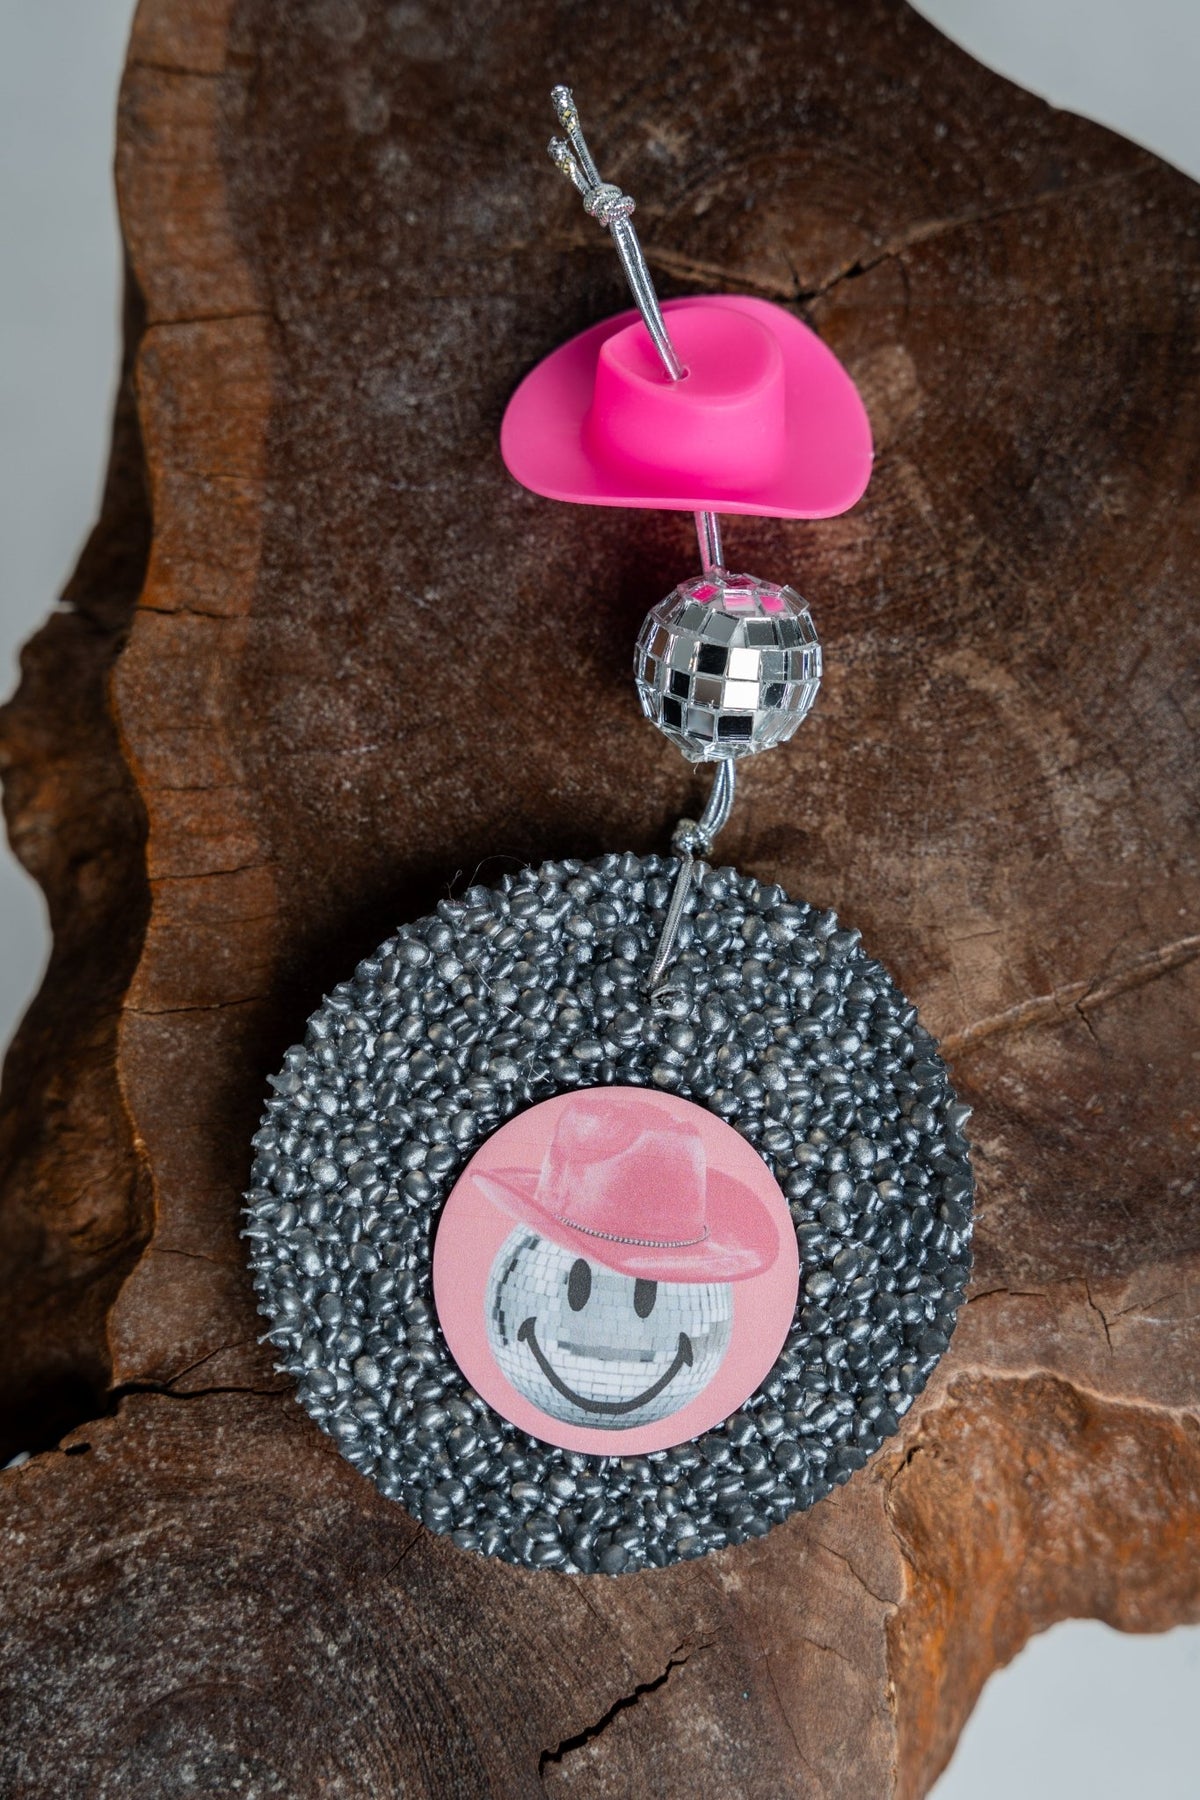 Disco ball cowboy hat silver freshie volcano - Trendy Candles and Scents at Lush Fashion Lounge Boutique in Oklahoma City